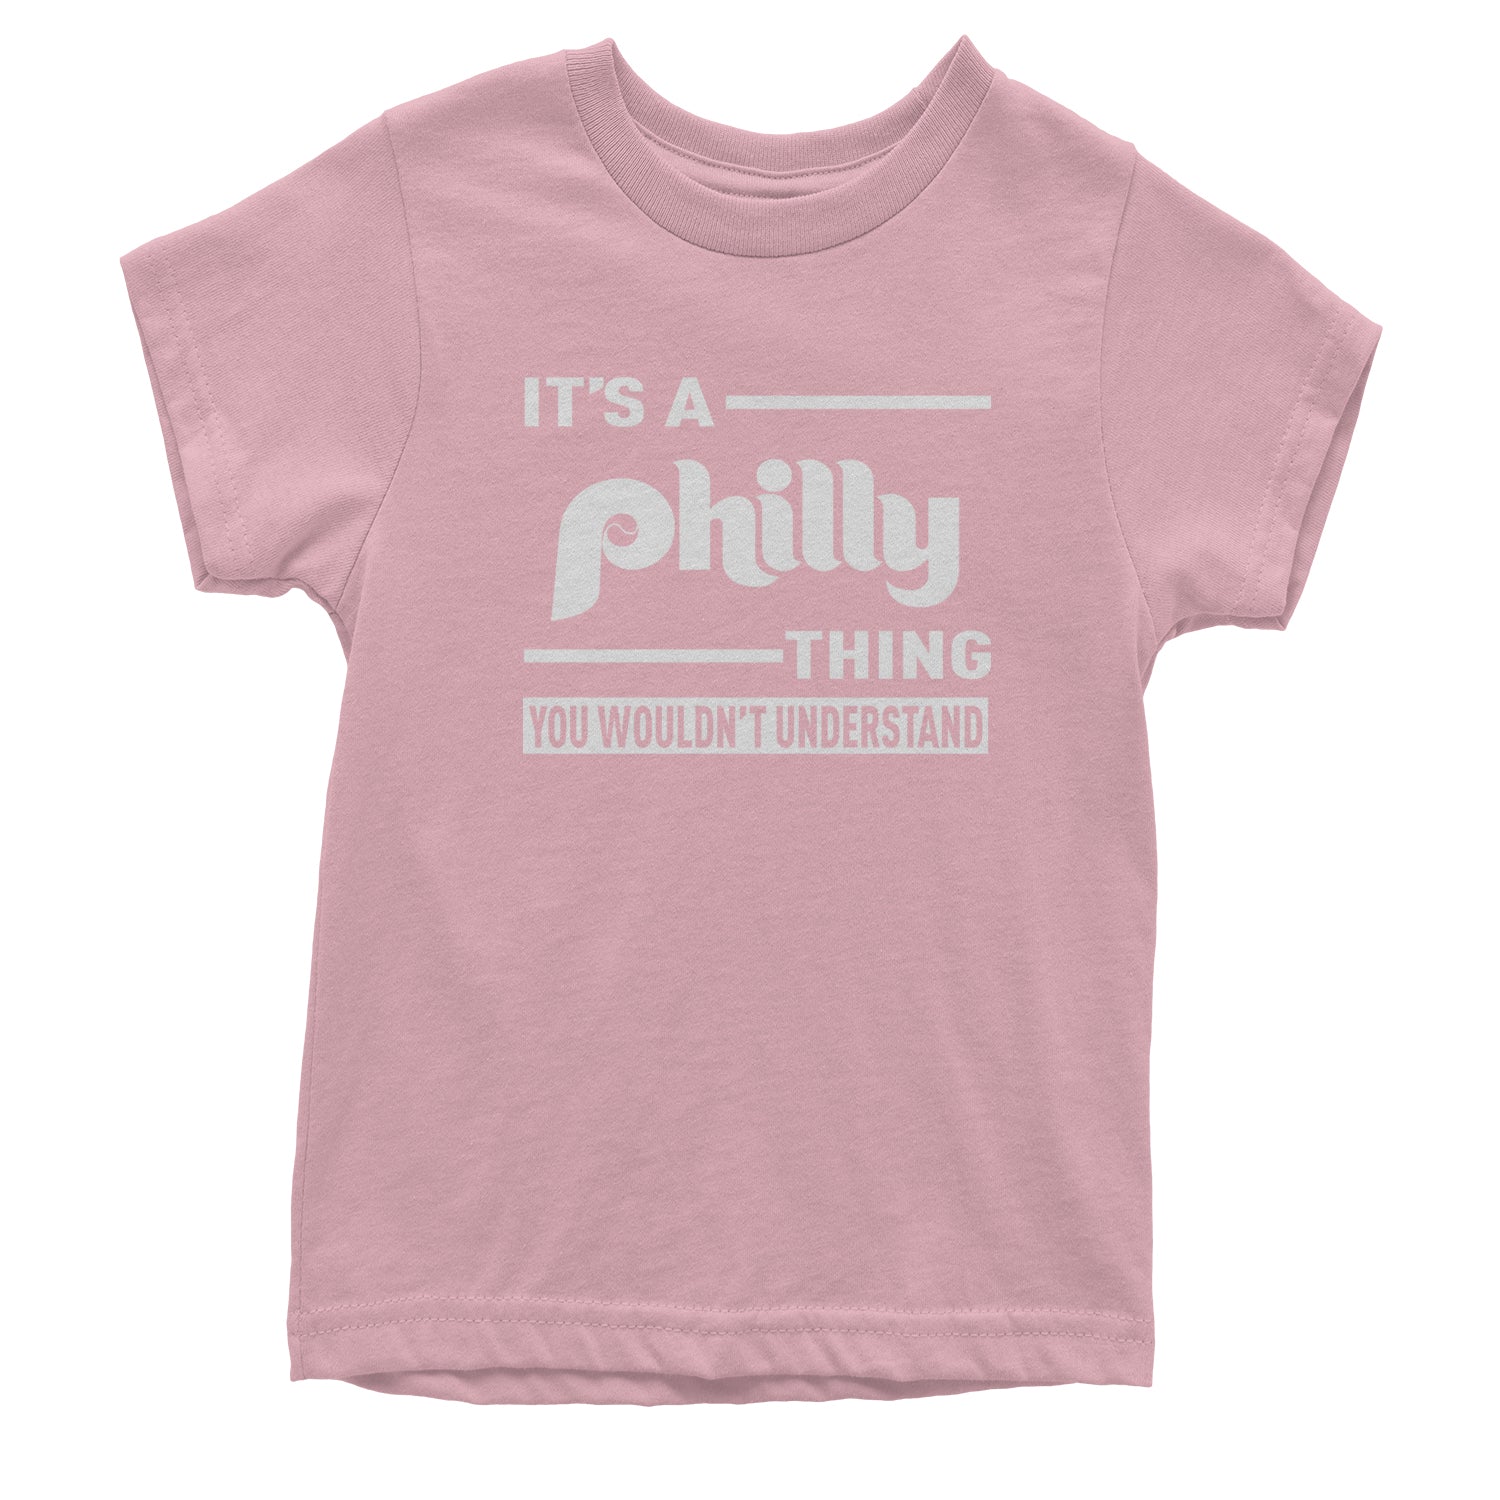 It's A Philly Thing, You Wouldn't Understand Youth T-shirt baseball, filly, football, jawn, morgan, Philadelphia, philli by Expression Tees